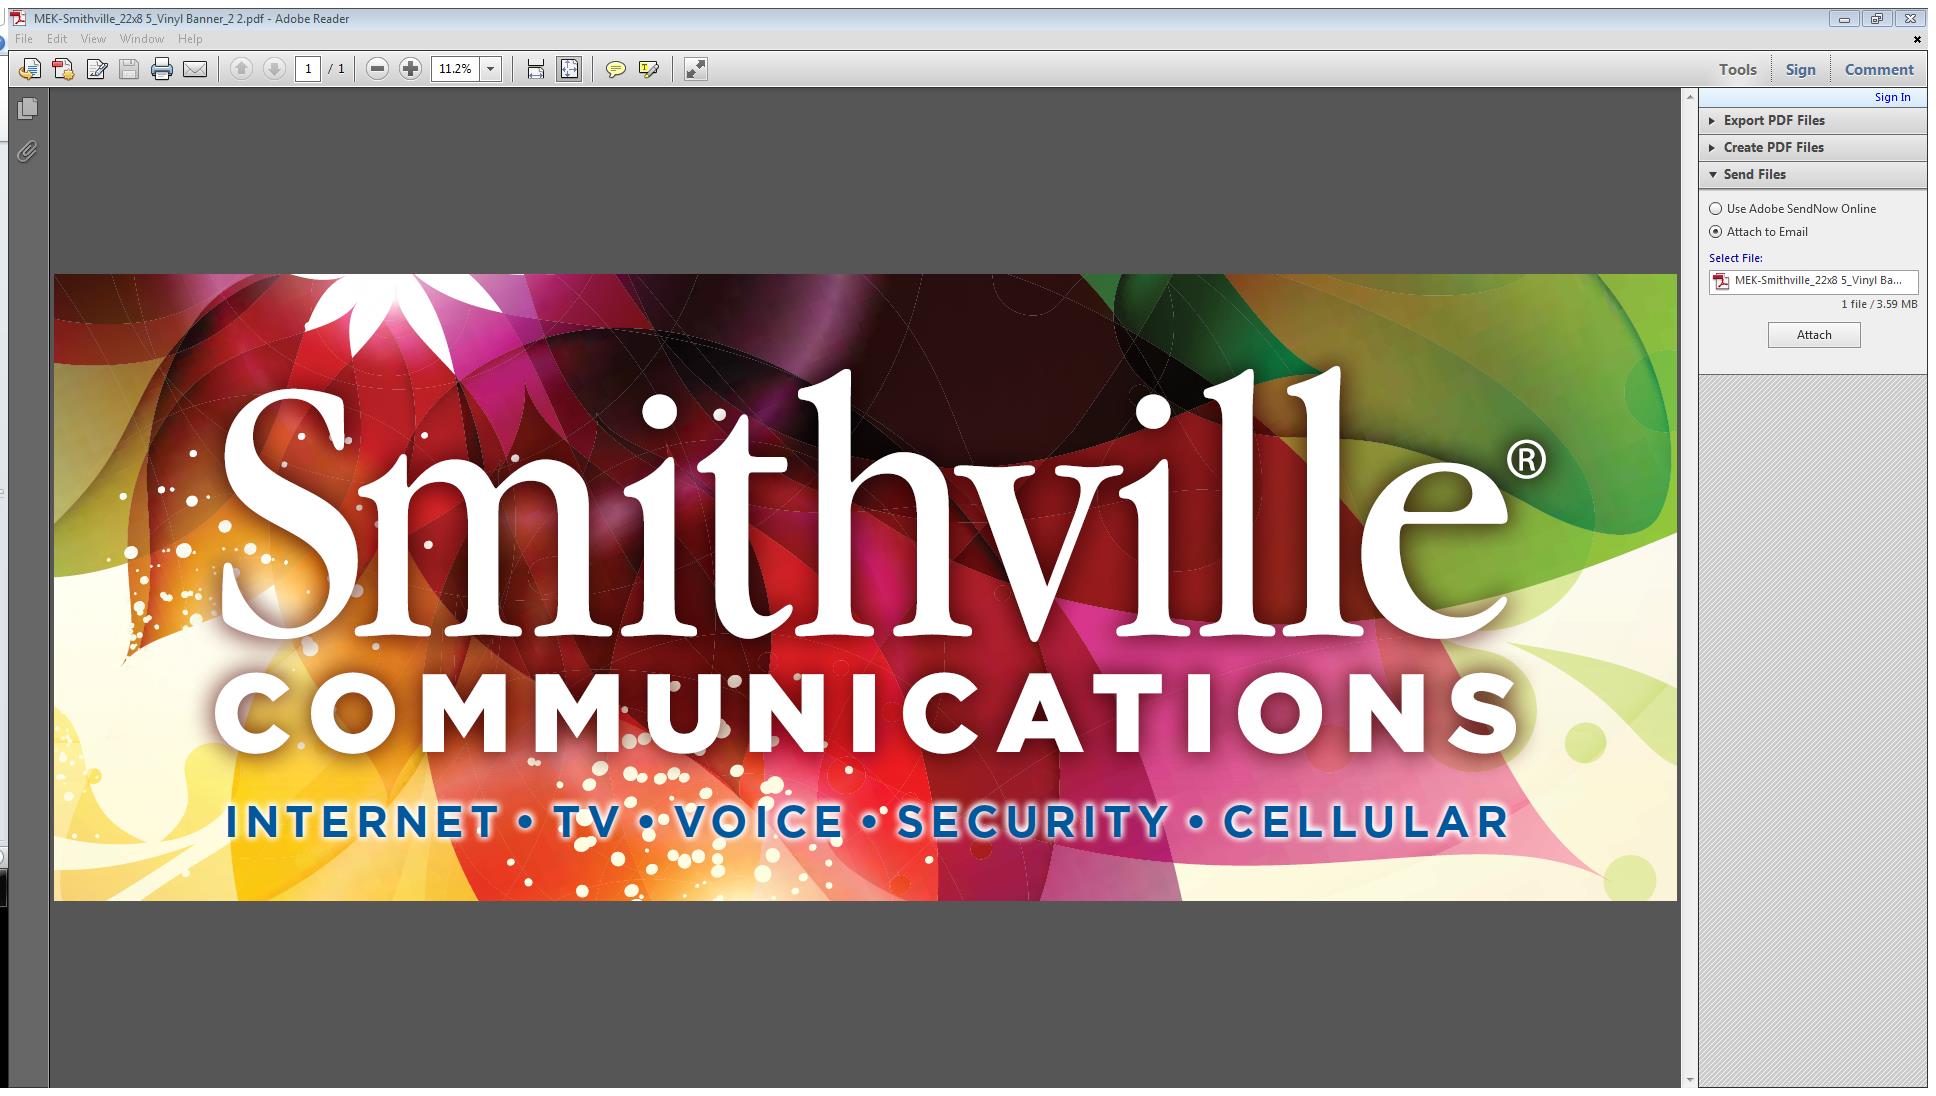 Delivering Indiana's fastest Internet with Gigabit connectivity capacity for residential fiber customers, Smithville Communications is Indiana's largest telecom.